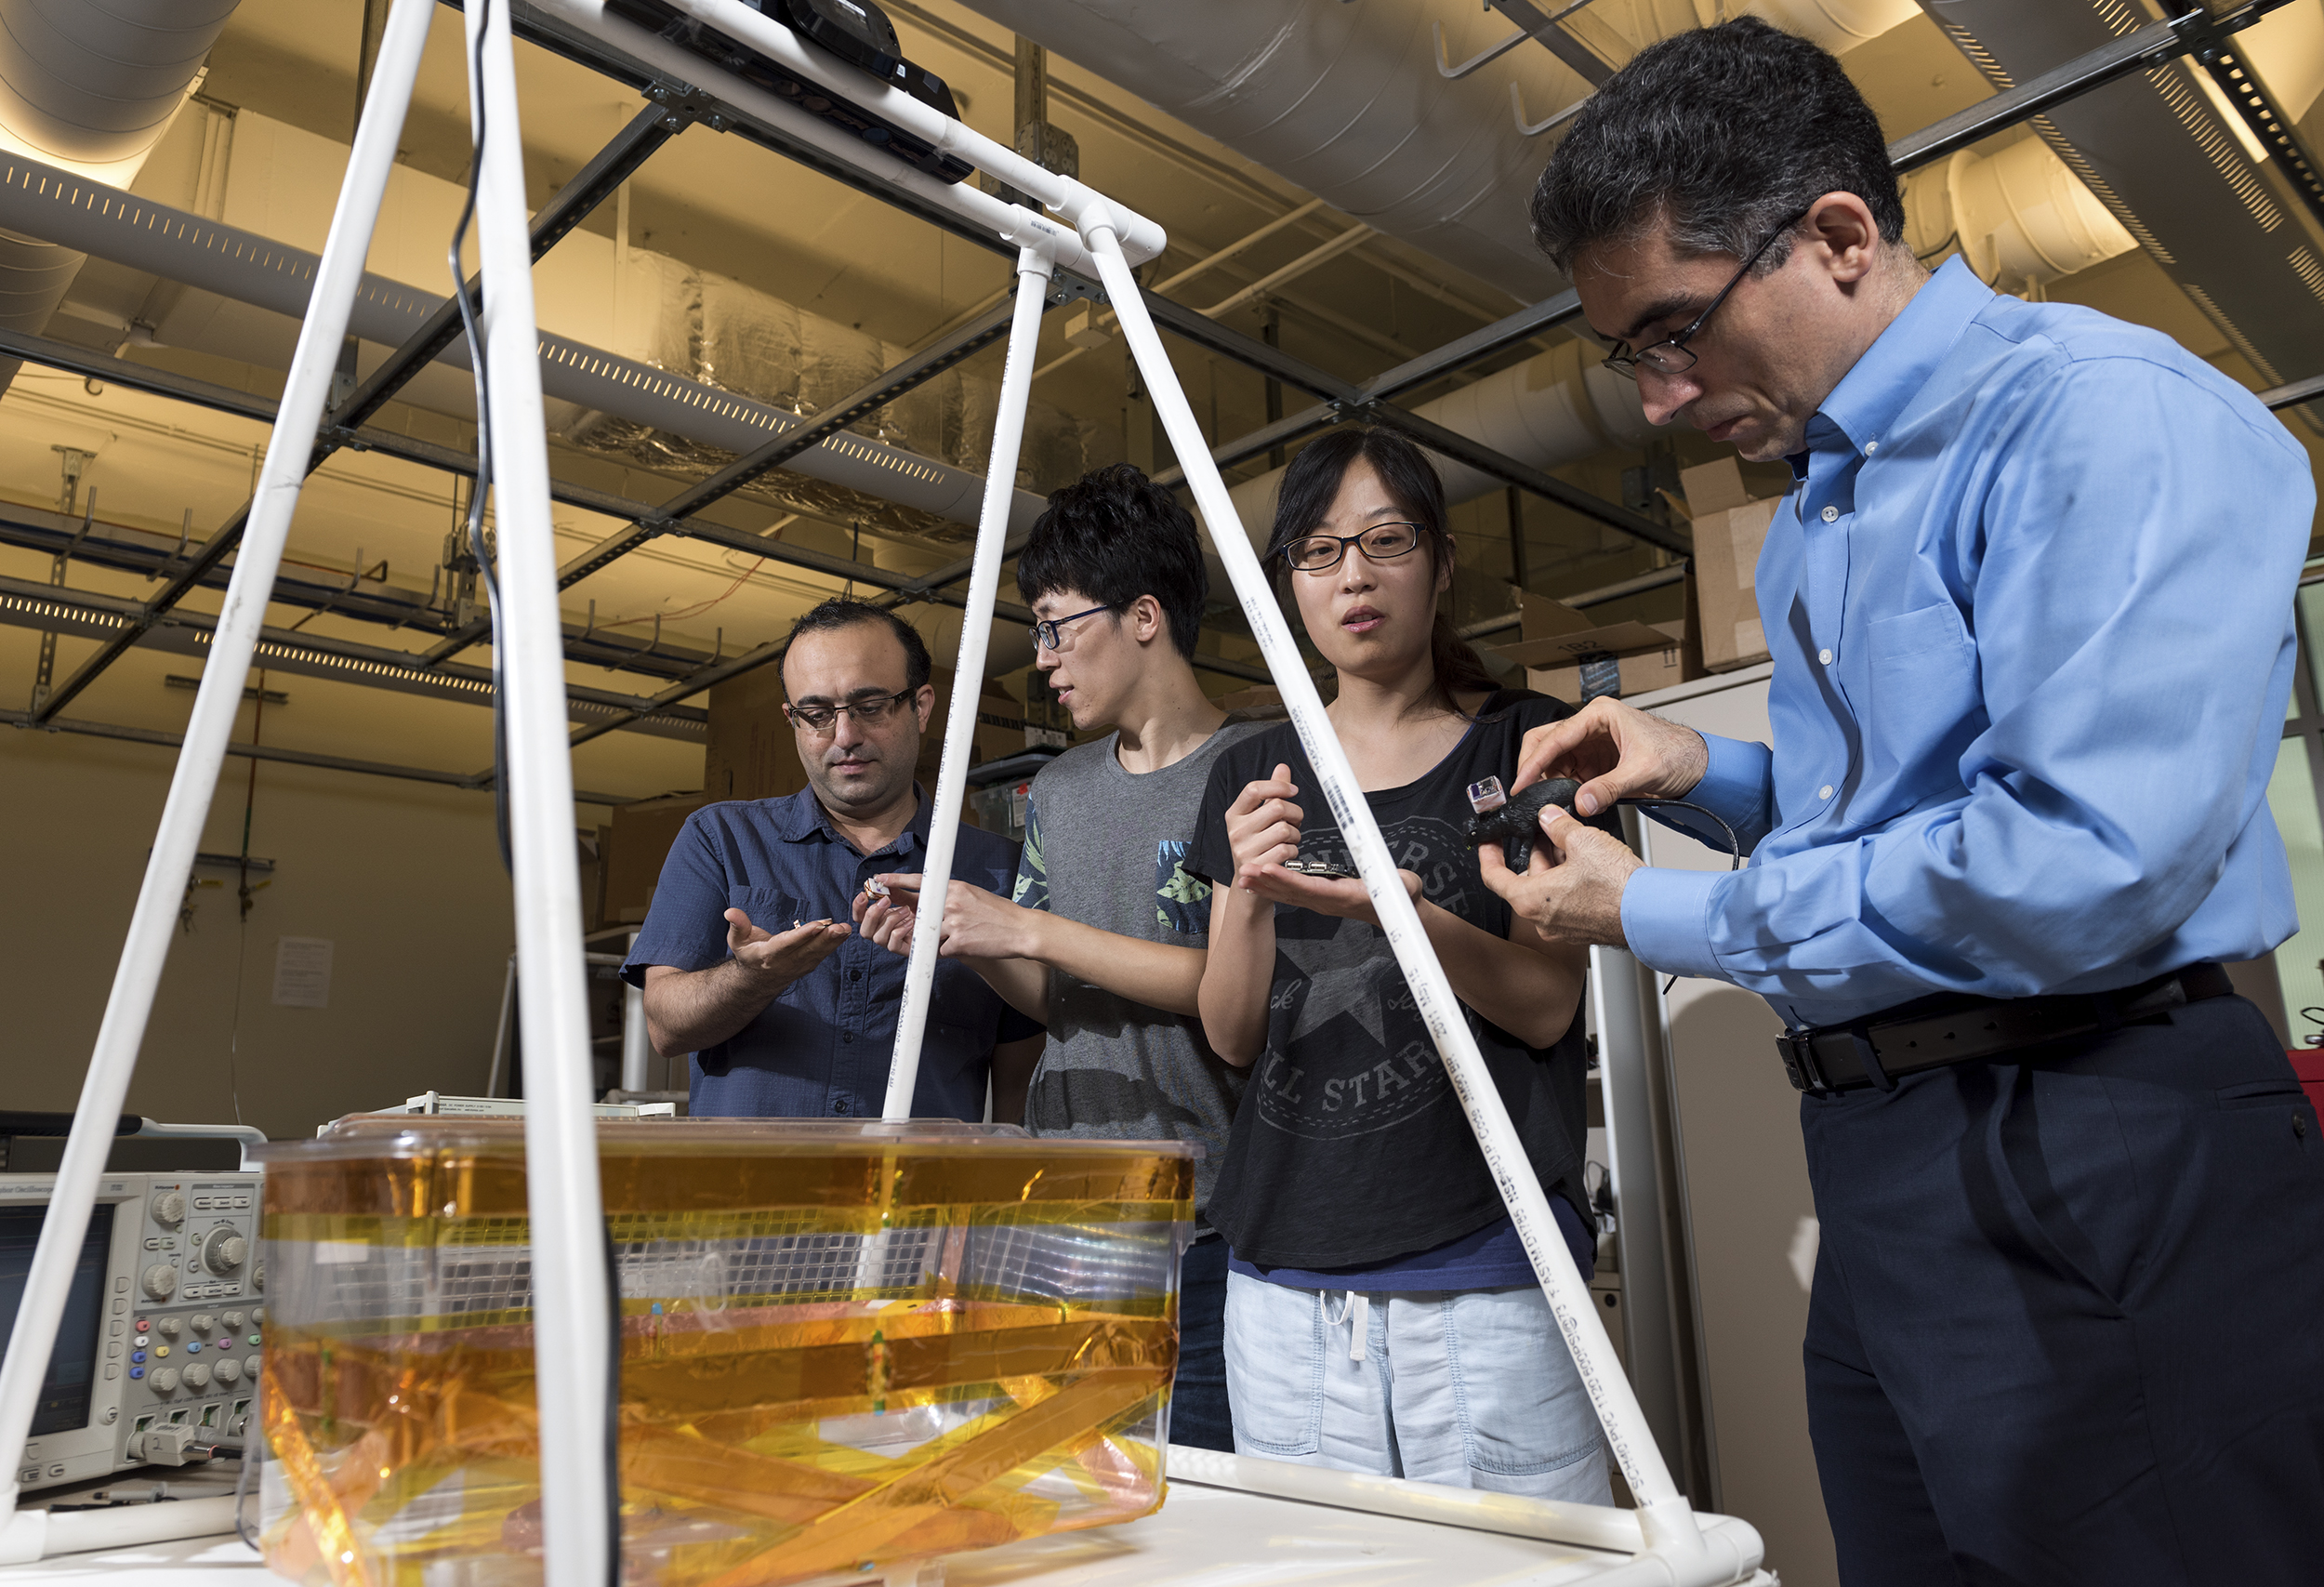 The EnerCage team in the lab. From left to right: S. Abdollah Mirbozorgi (post-doc), Zheyuan Wang (Ph.D. student), Yaoyao Jia (Ph.D. student) and Maysam Ghovanloo (associate professor)